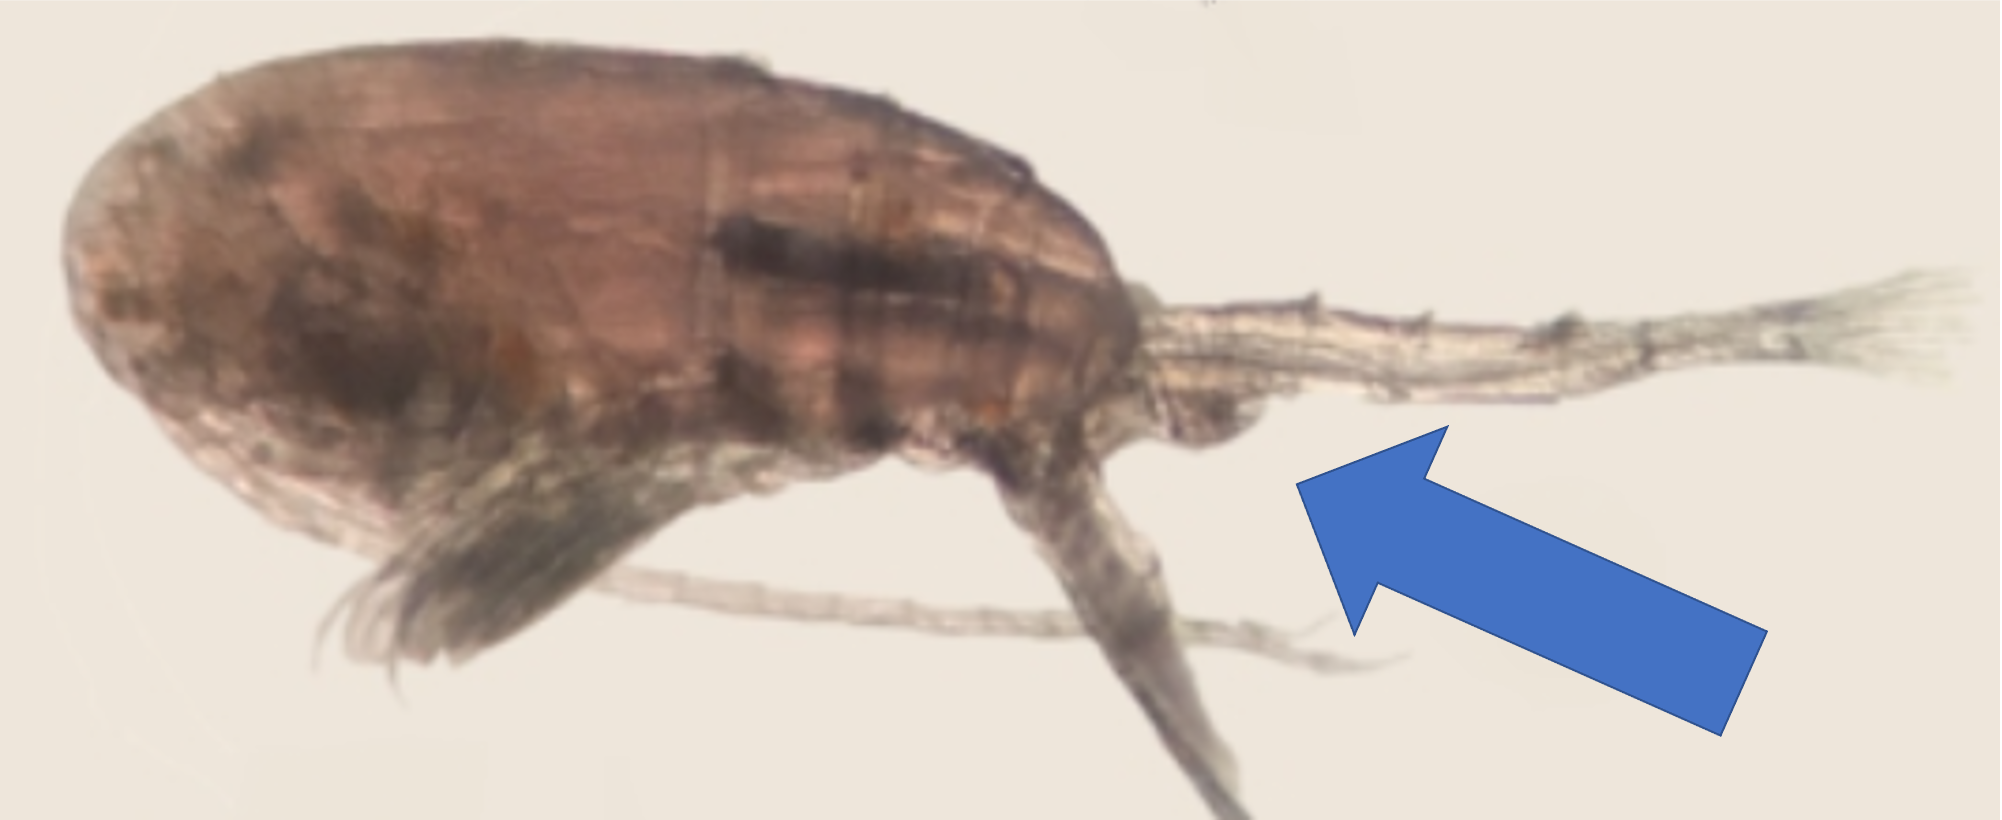 female copepod under a microscope, with an arrow pointing toward the tail